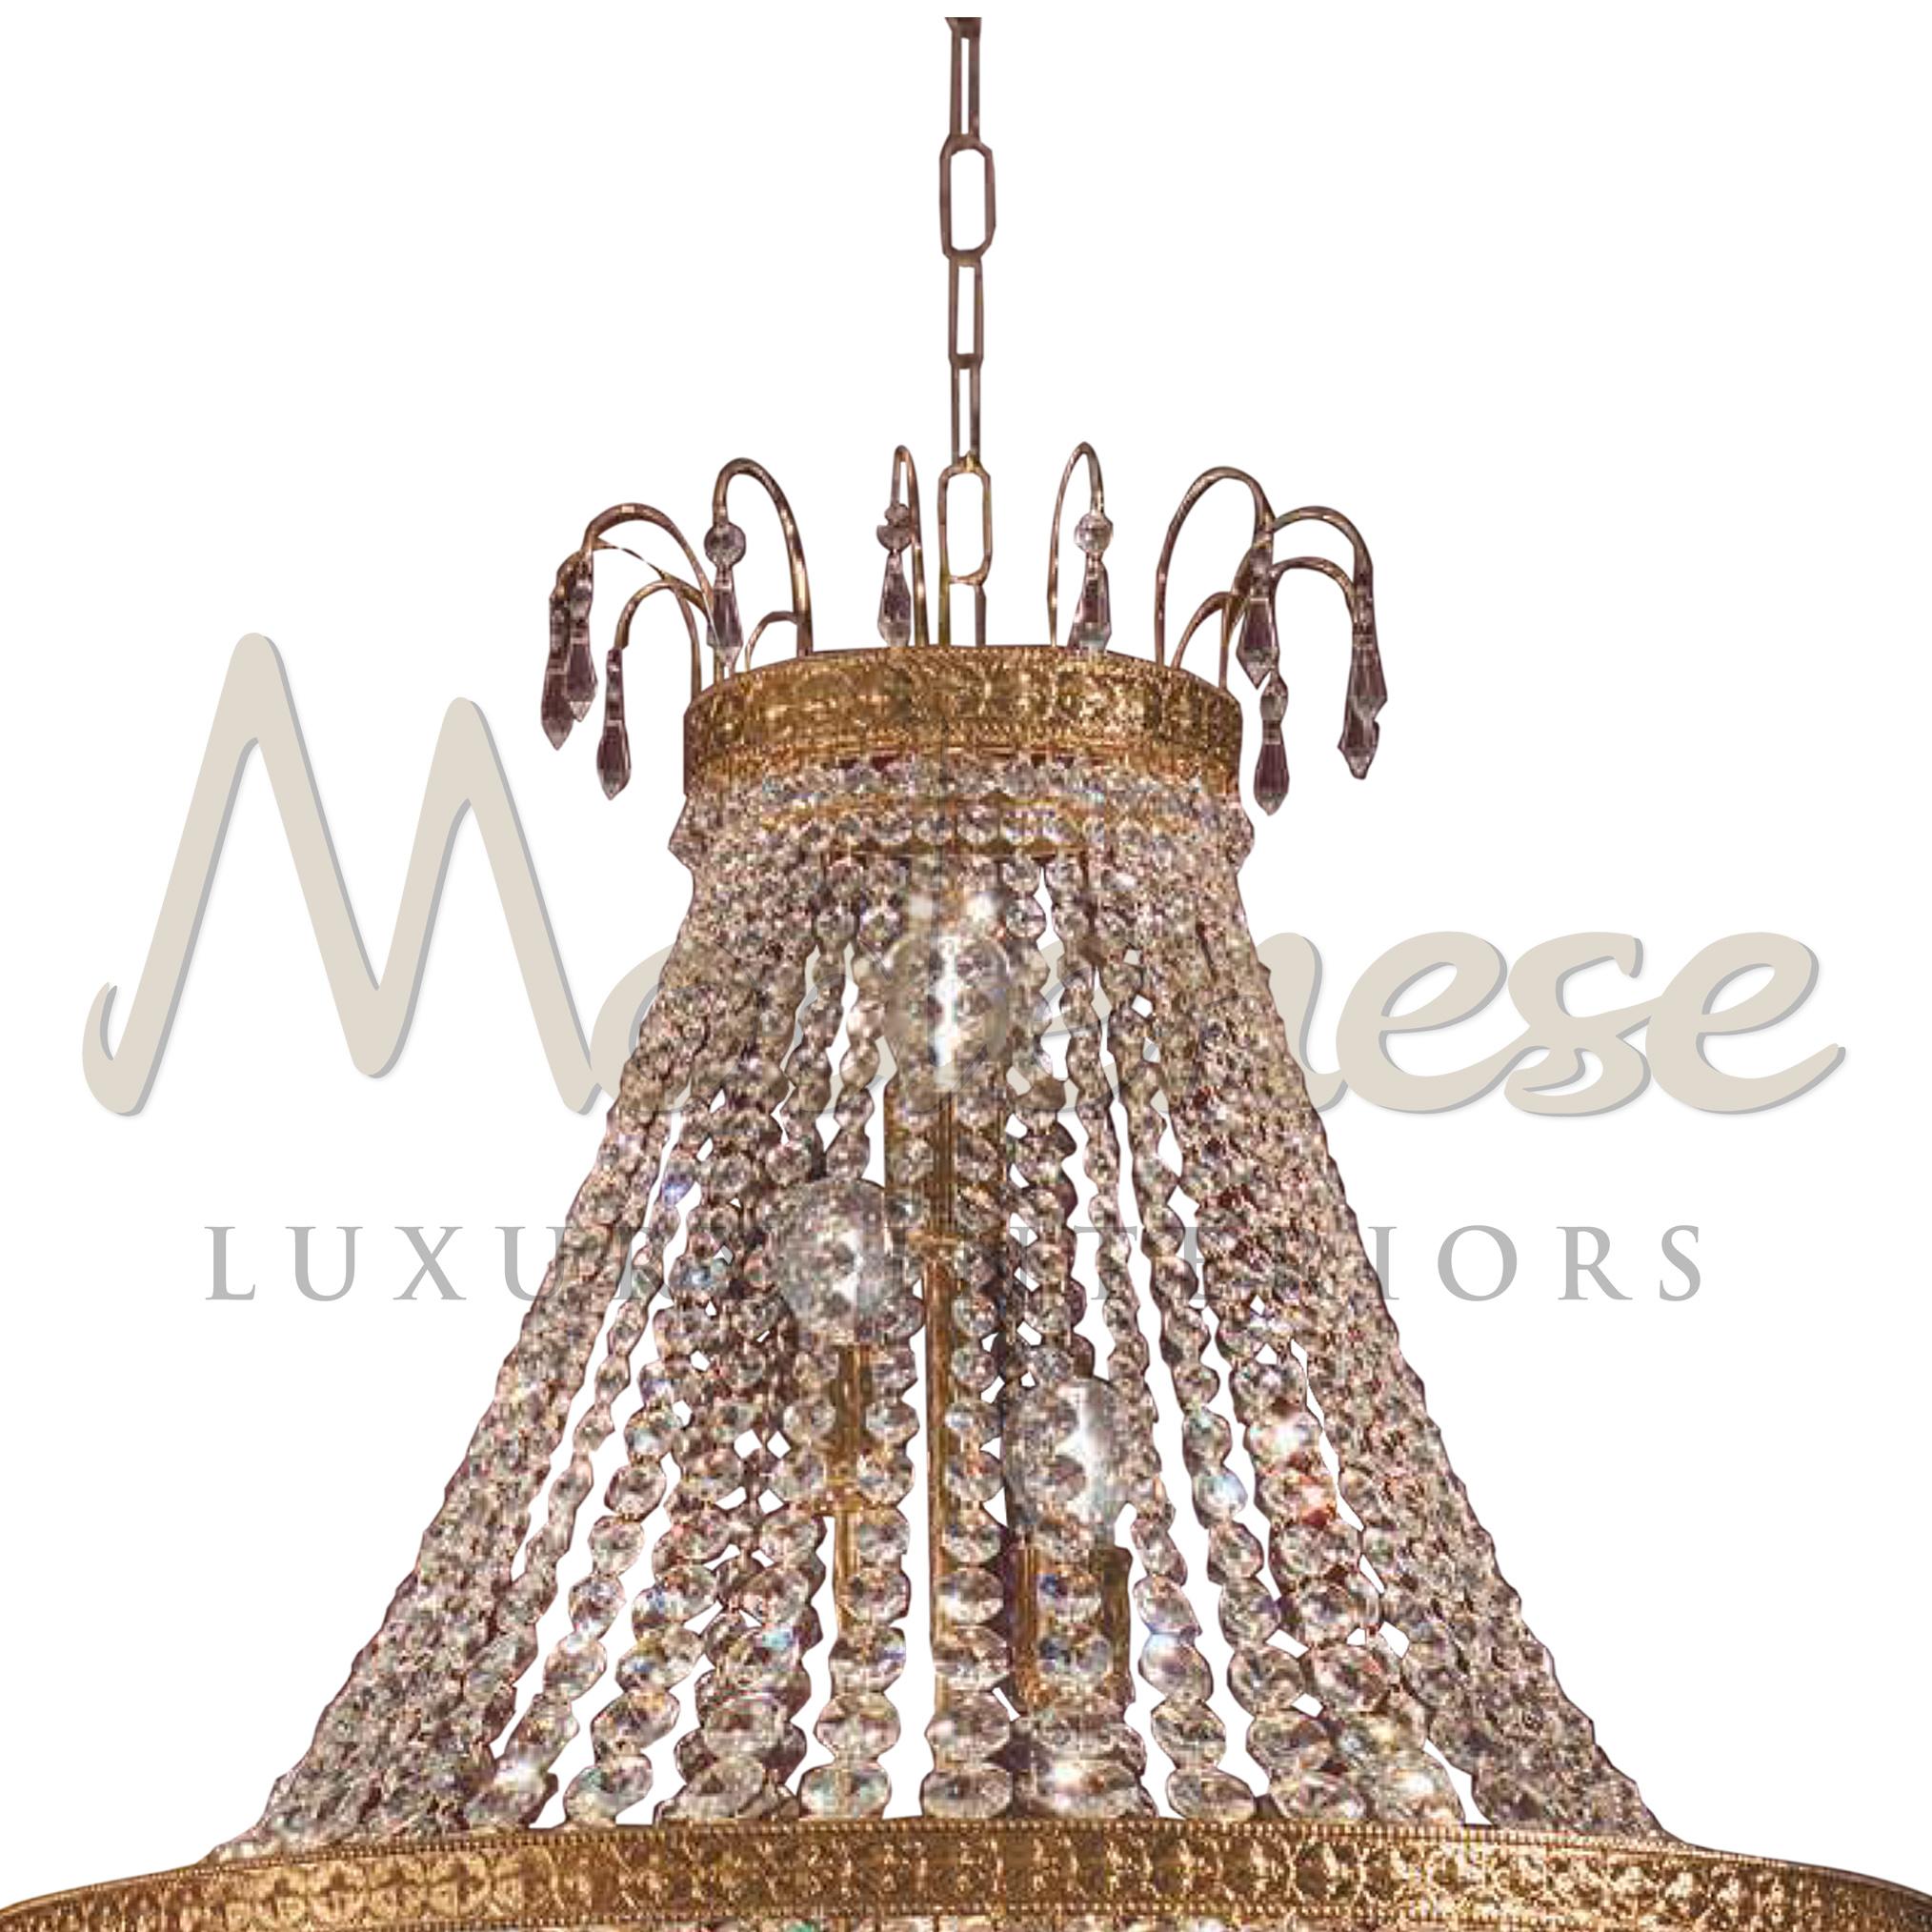 The occupation of such a majestic chandelier emphasizes the presence of aesthetic finery among homeowners and, as a rule, speaks of their respectability and prestige, plated in 24k gold and with Scholer crystals. This model requires 12 single E14